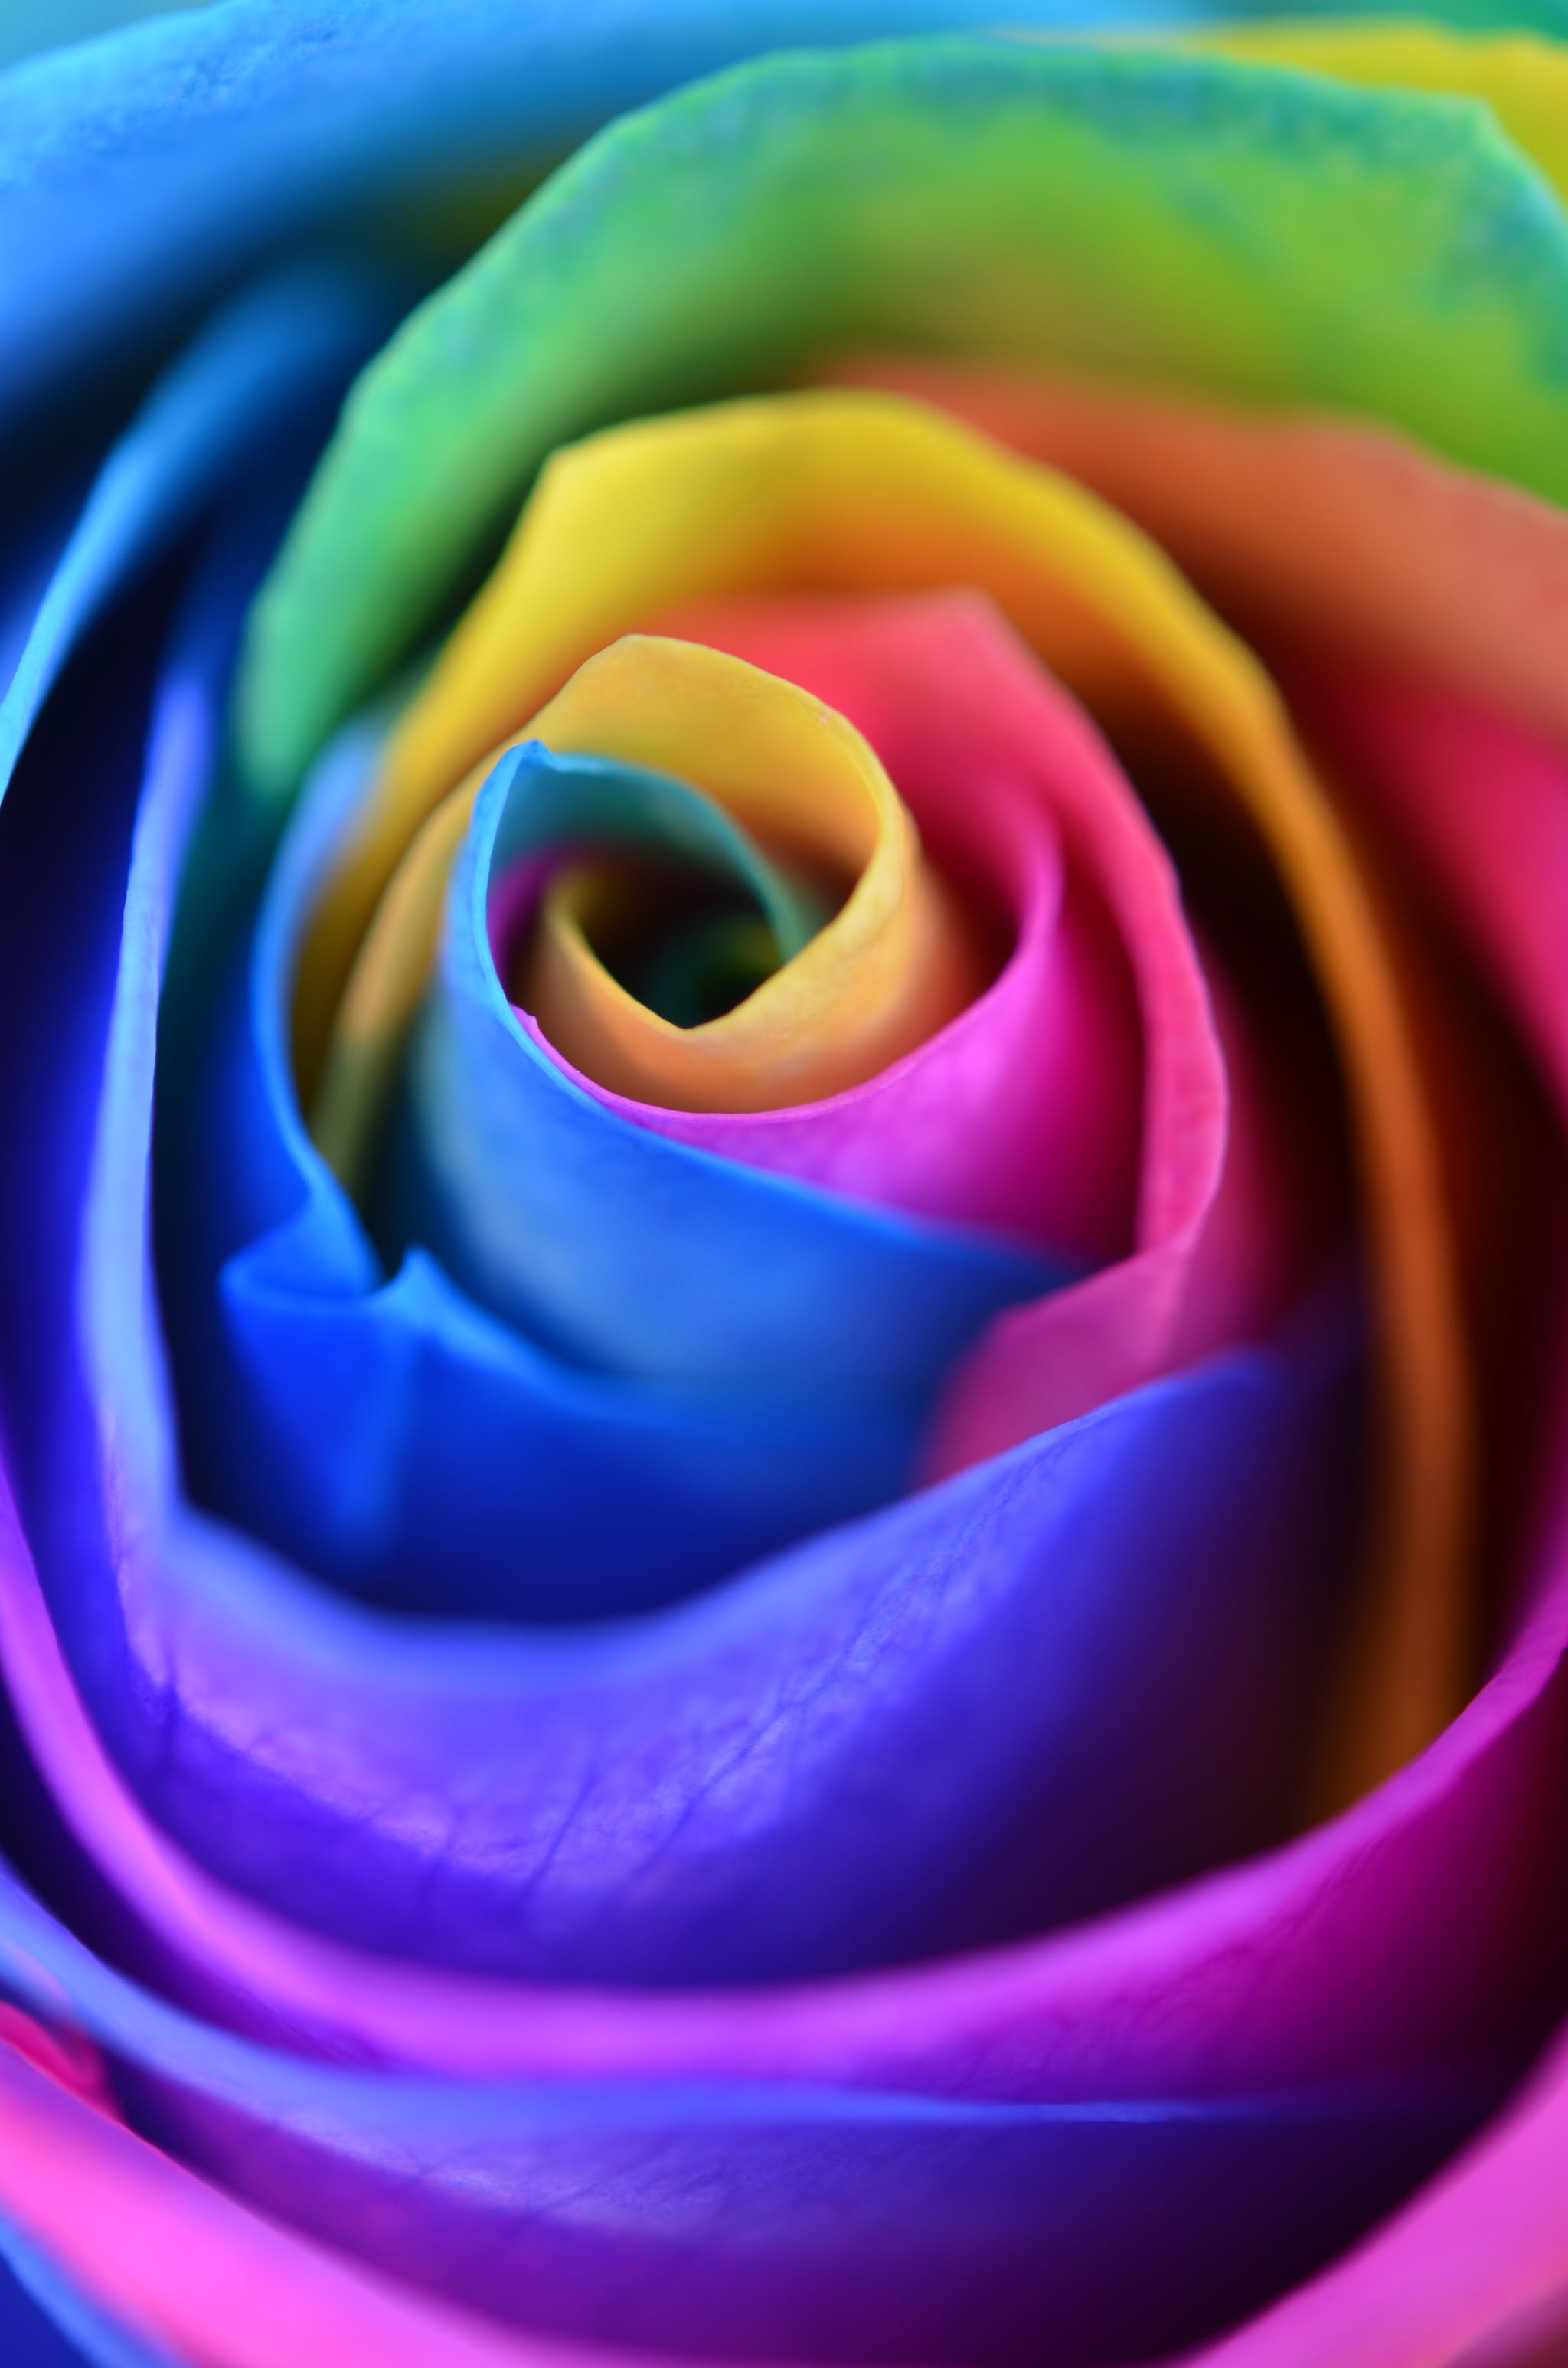 Valentine's Day Wallpaper: Rainbow Rose. The Dreamiest iPhone Wallpaper For Valentine's Day That Fit Any Aesthetic